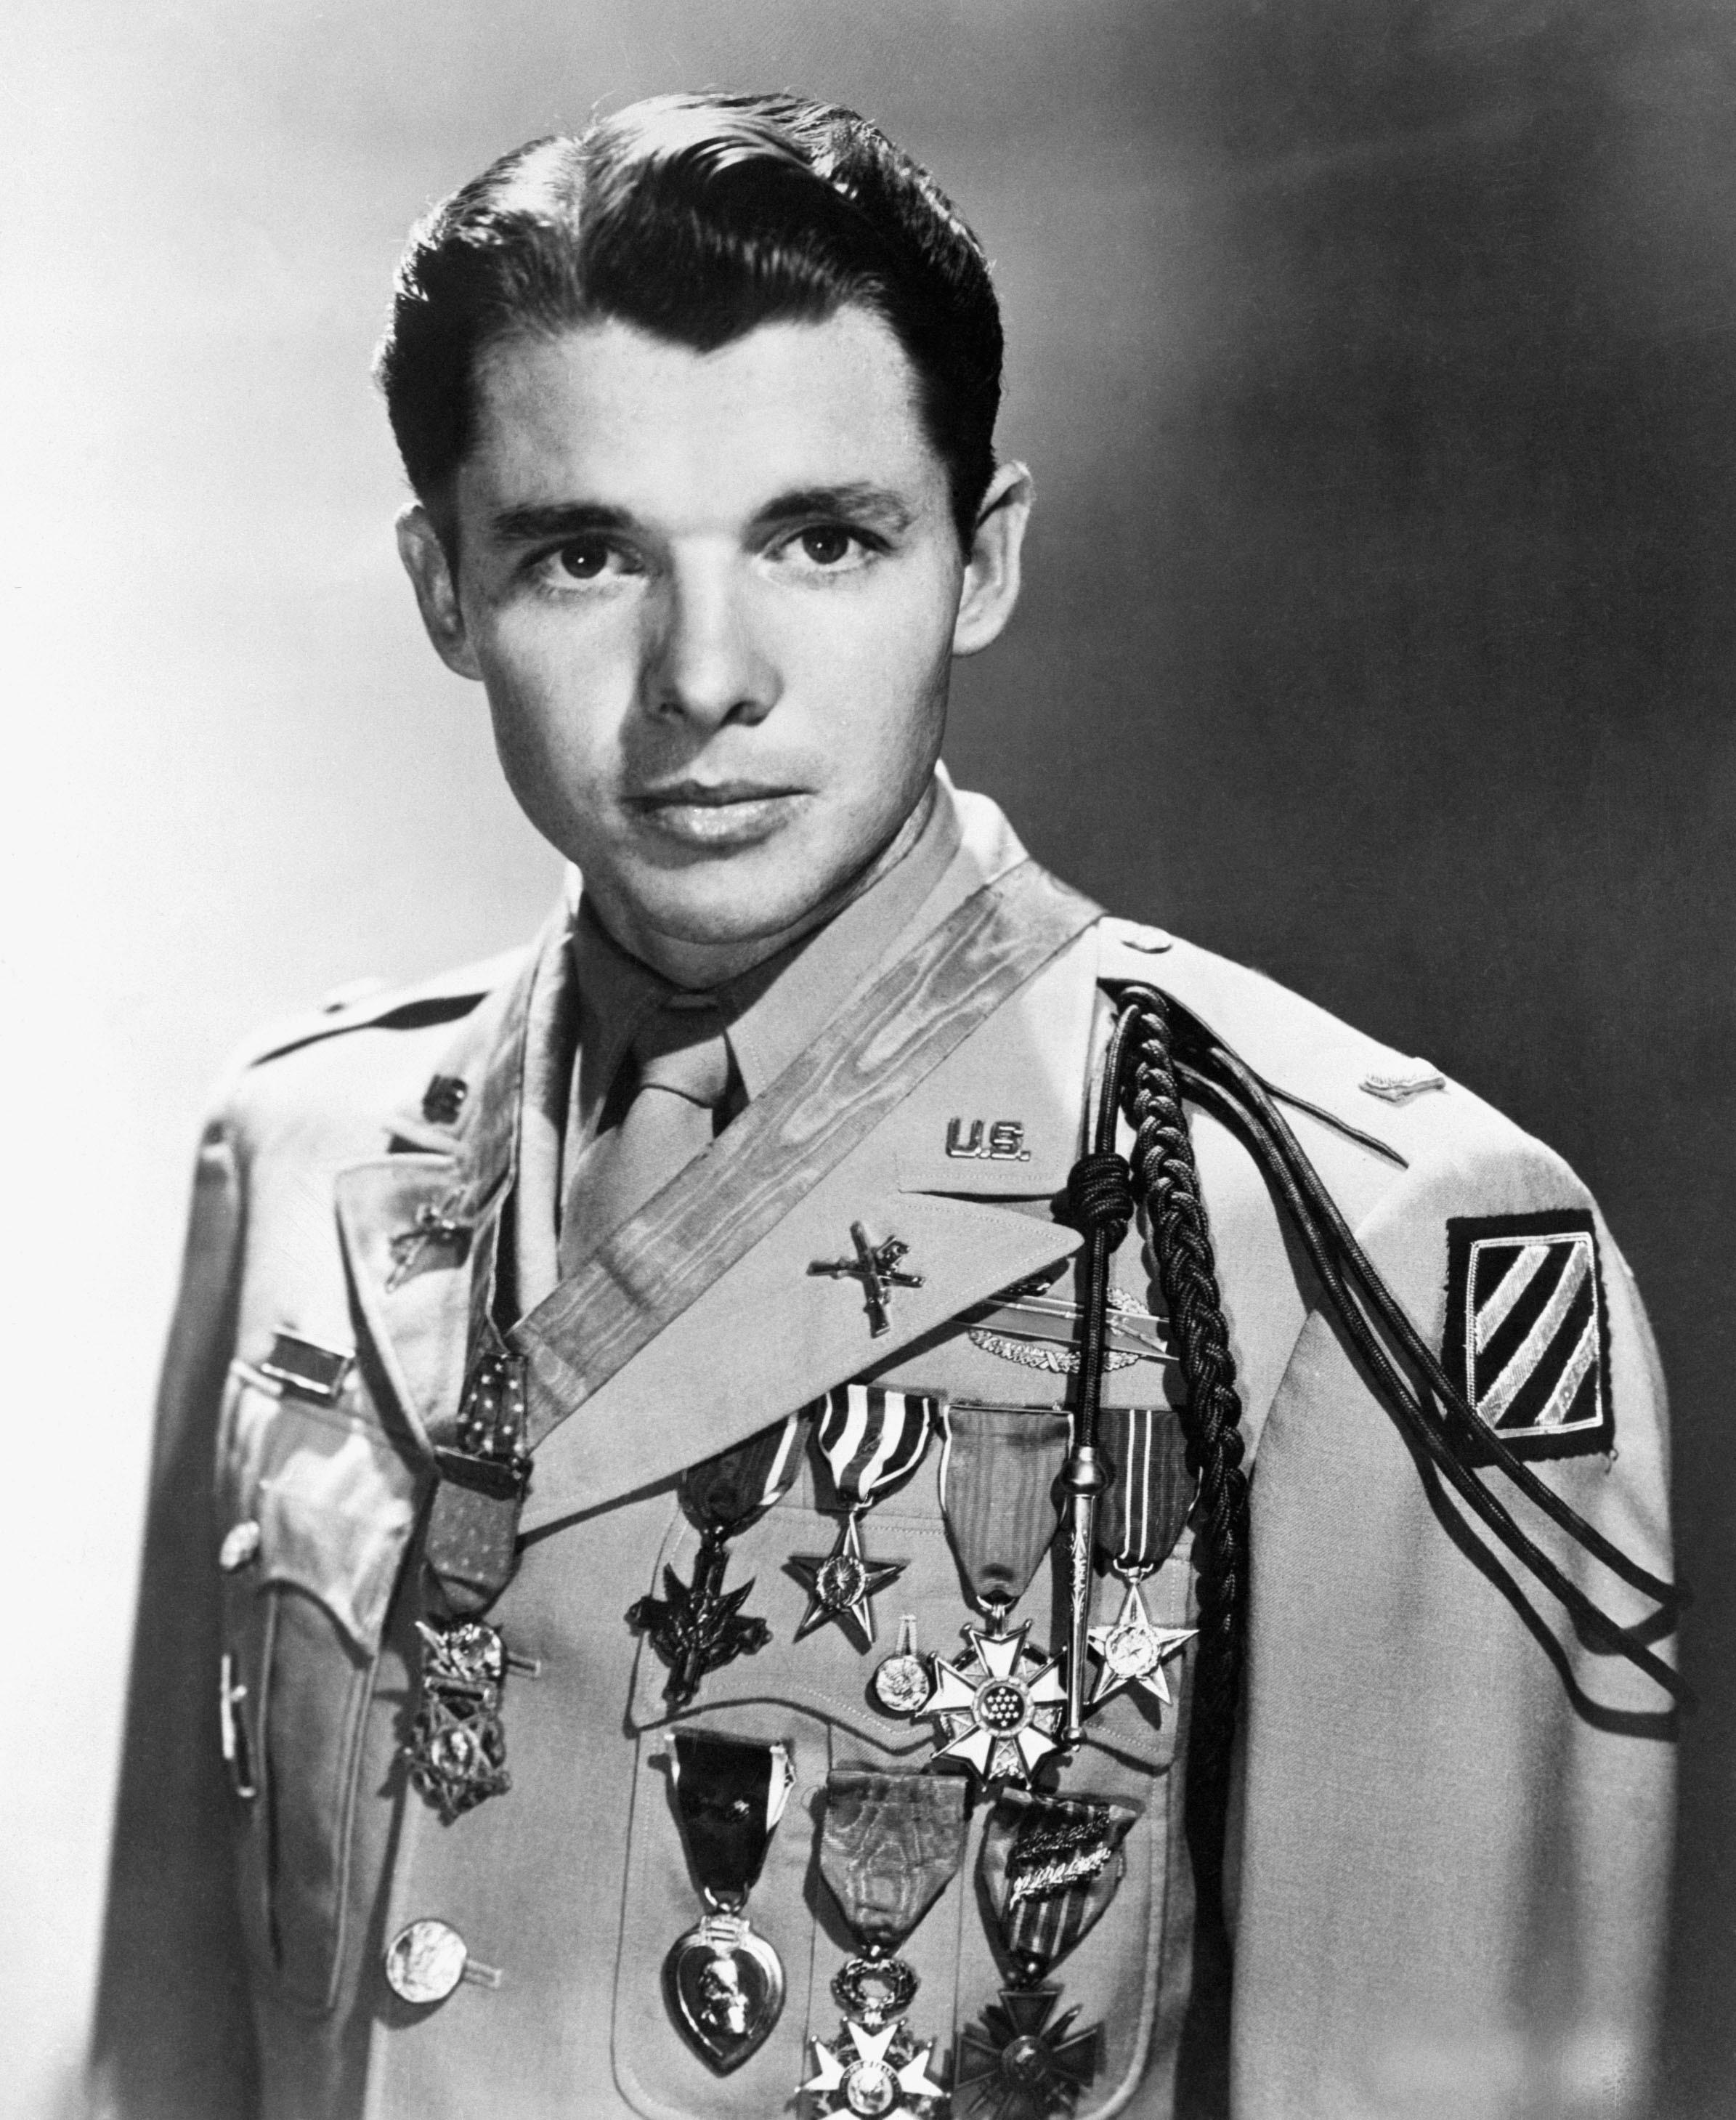 Audie Murphy Archives - This Day in Aviation